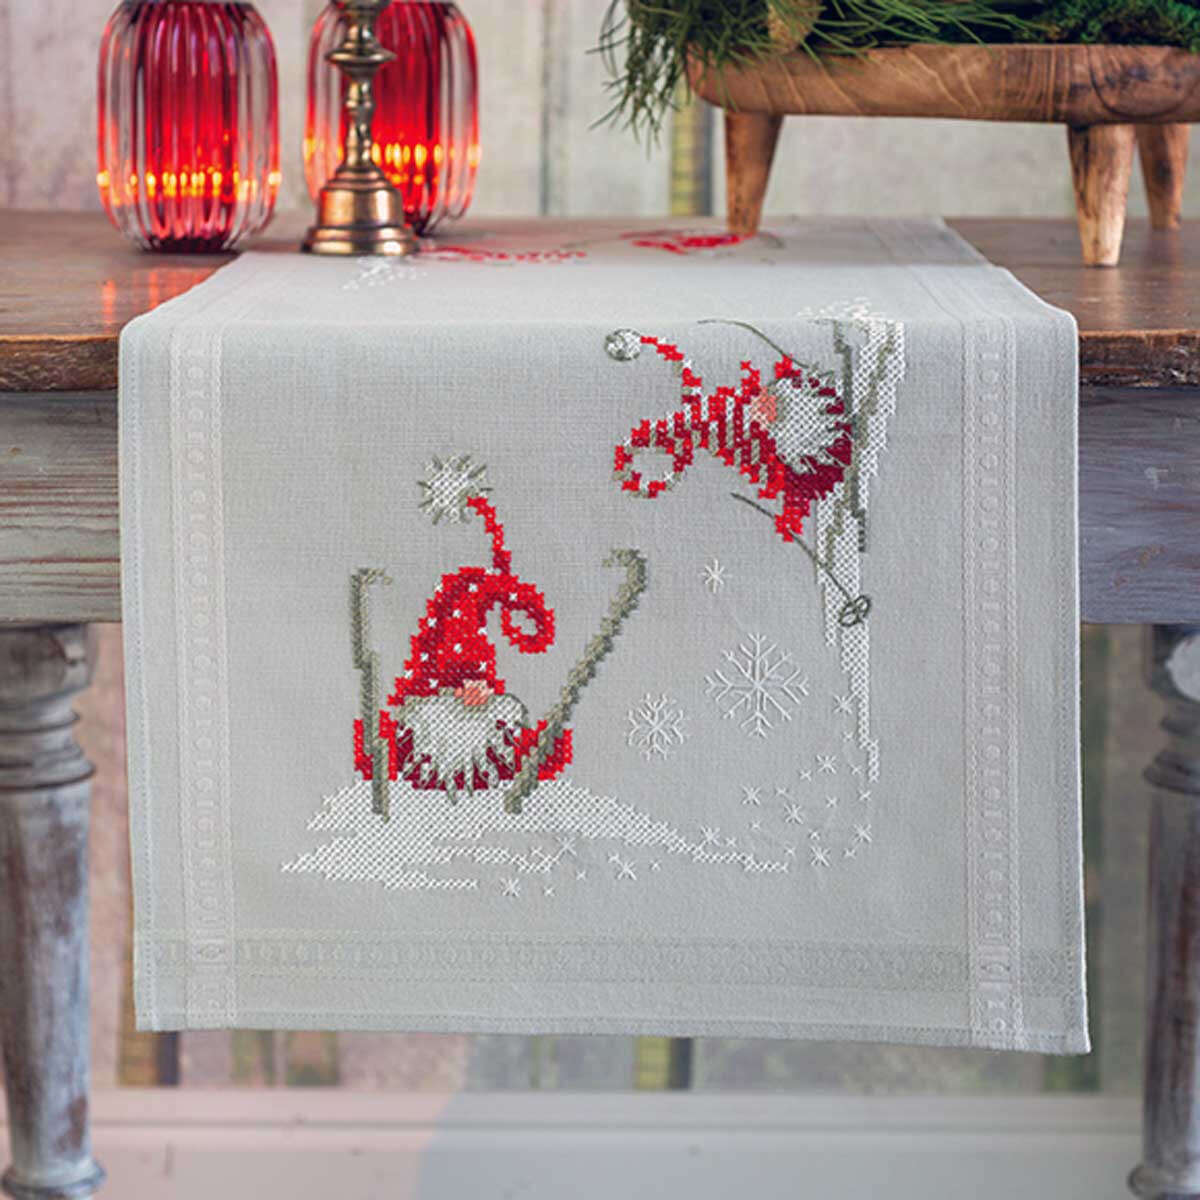 Vervaco table runner cross stitch kit "Christmas...